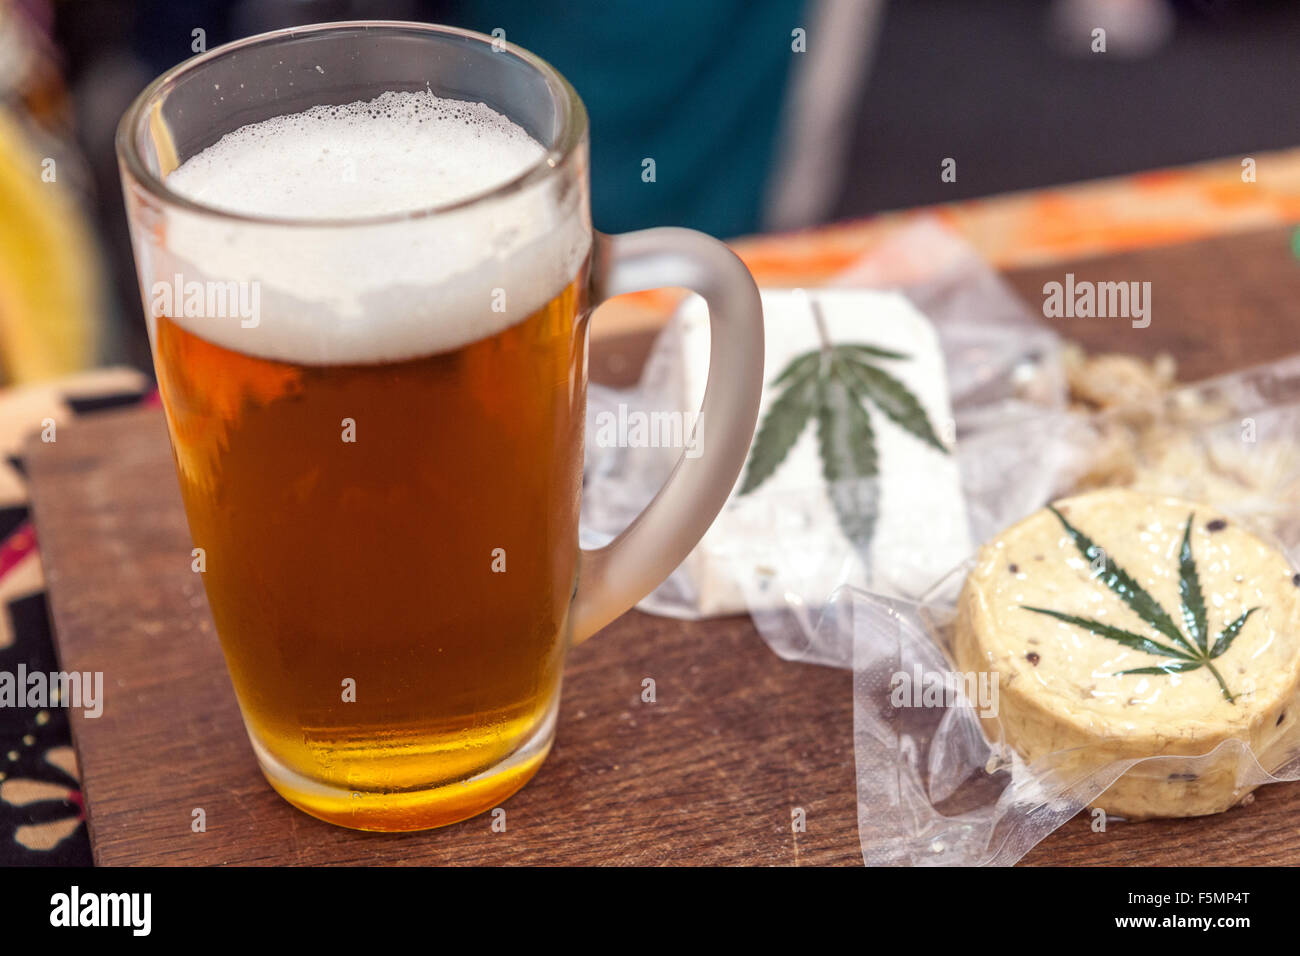 Vacuum packed sheep's cheese, decorated hemp leaf, Czech Republic beer, and cannabis edible Stock Photo